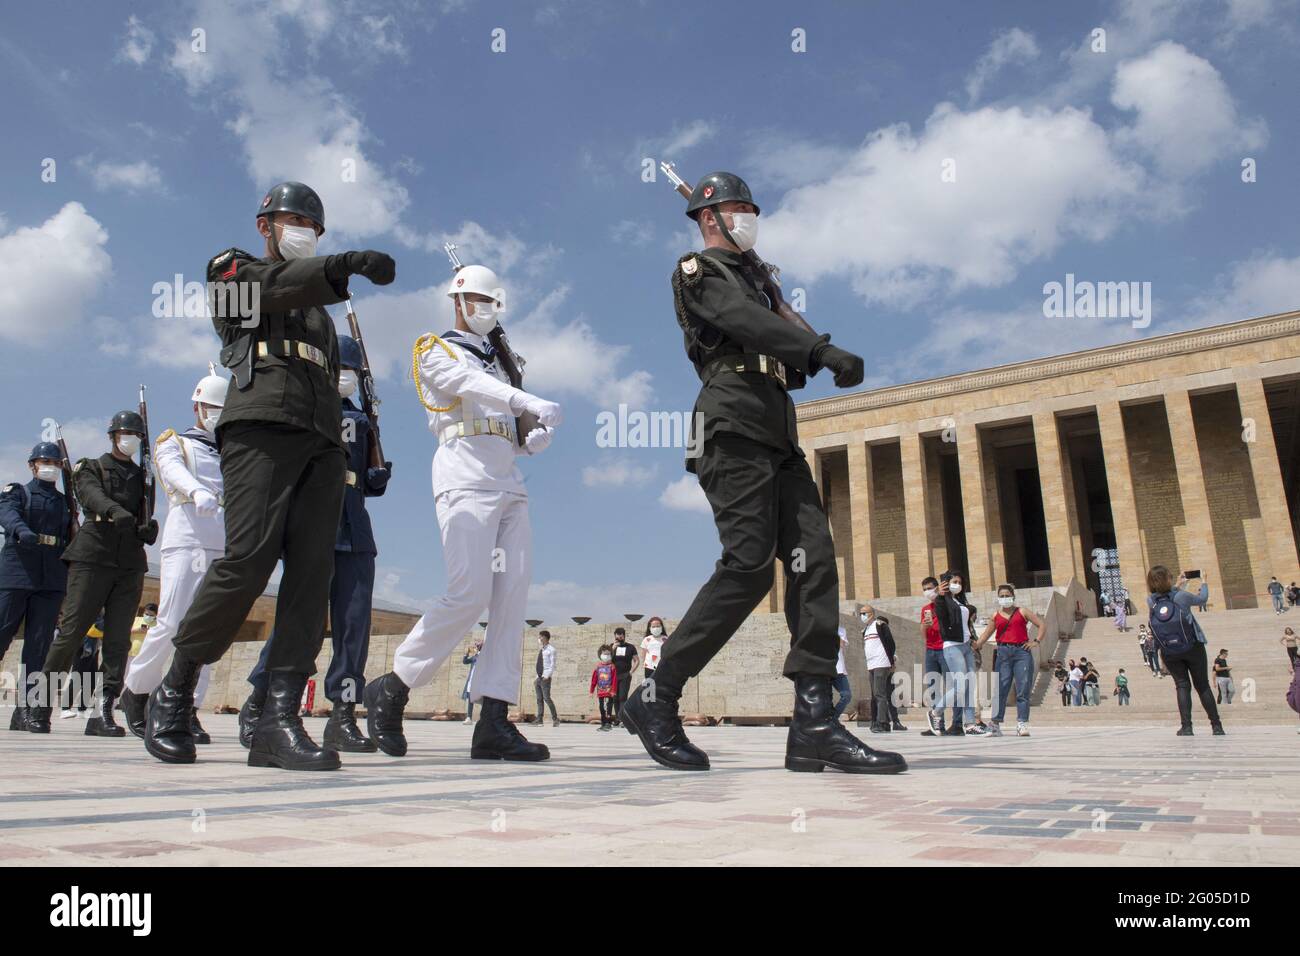 Turkish soldiers wear face masks as a preventive measure against the spread of the COVID-19 novel coronavirus, at Anitkabir, the mausoleum of Mustafa Kemal Ataturk, the founder of the Turkish Republic, in Ankara Turkey, on May 31, 2021. Turkey has confirmed 47,527 deaths and 5,249,404 positive cases of the coronavirus infection in the country. Turkey started easing its strict coronavirus lockdown on Monday by allowing movement during the day while keeping overnight and weekend curfews in place, the Interior Ministry said in a directive on Sunday. Photo by Abdurrahman Antakyali/Depo Photos/ABAC Stock Photo